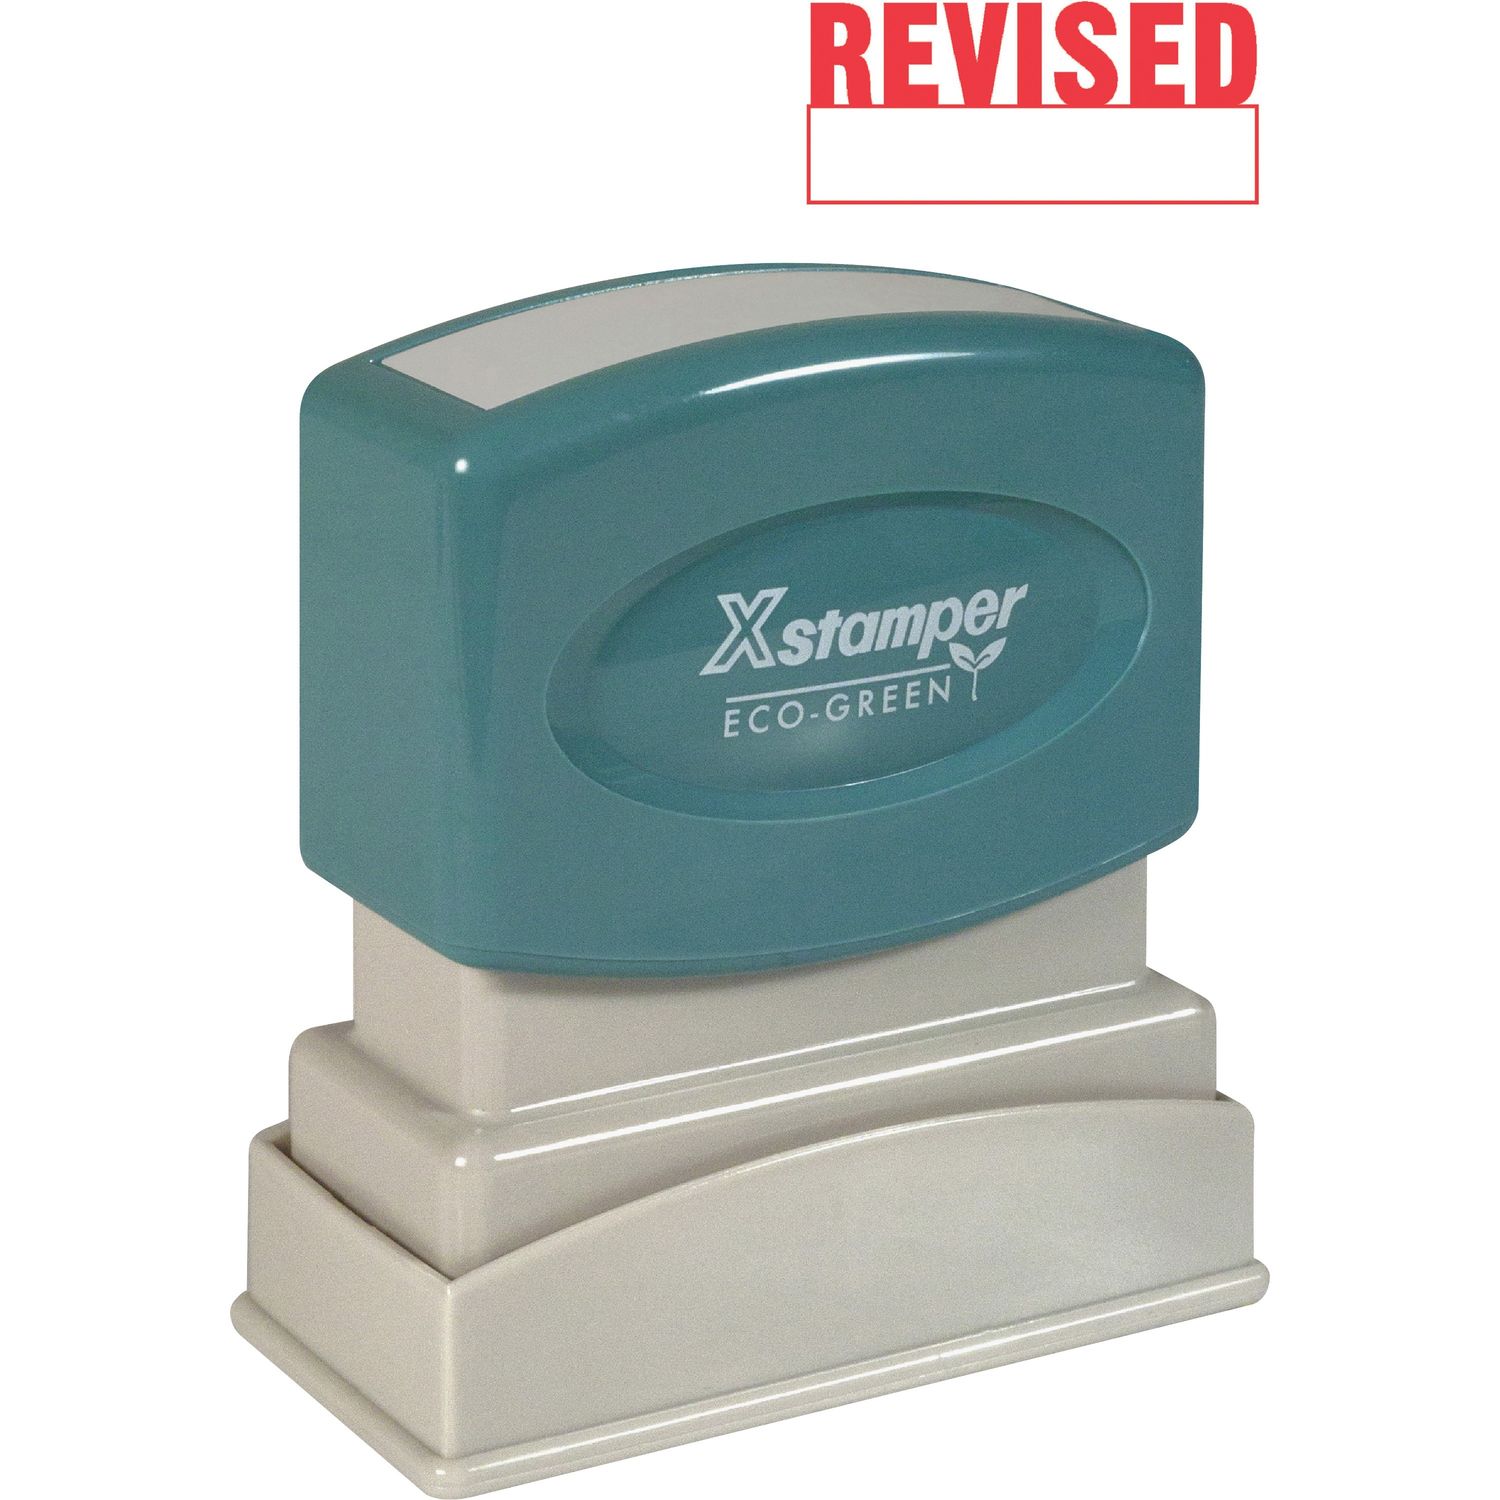 REVISED Title Stamp Message Stamp, "REVISED", 0.50" Impression Width x 1.63" Impression Length, 100000 Impression(s), Red, Recycled, 1 Each